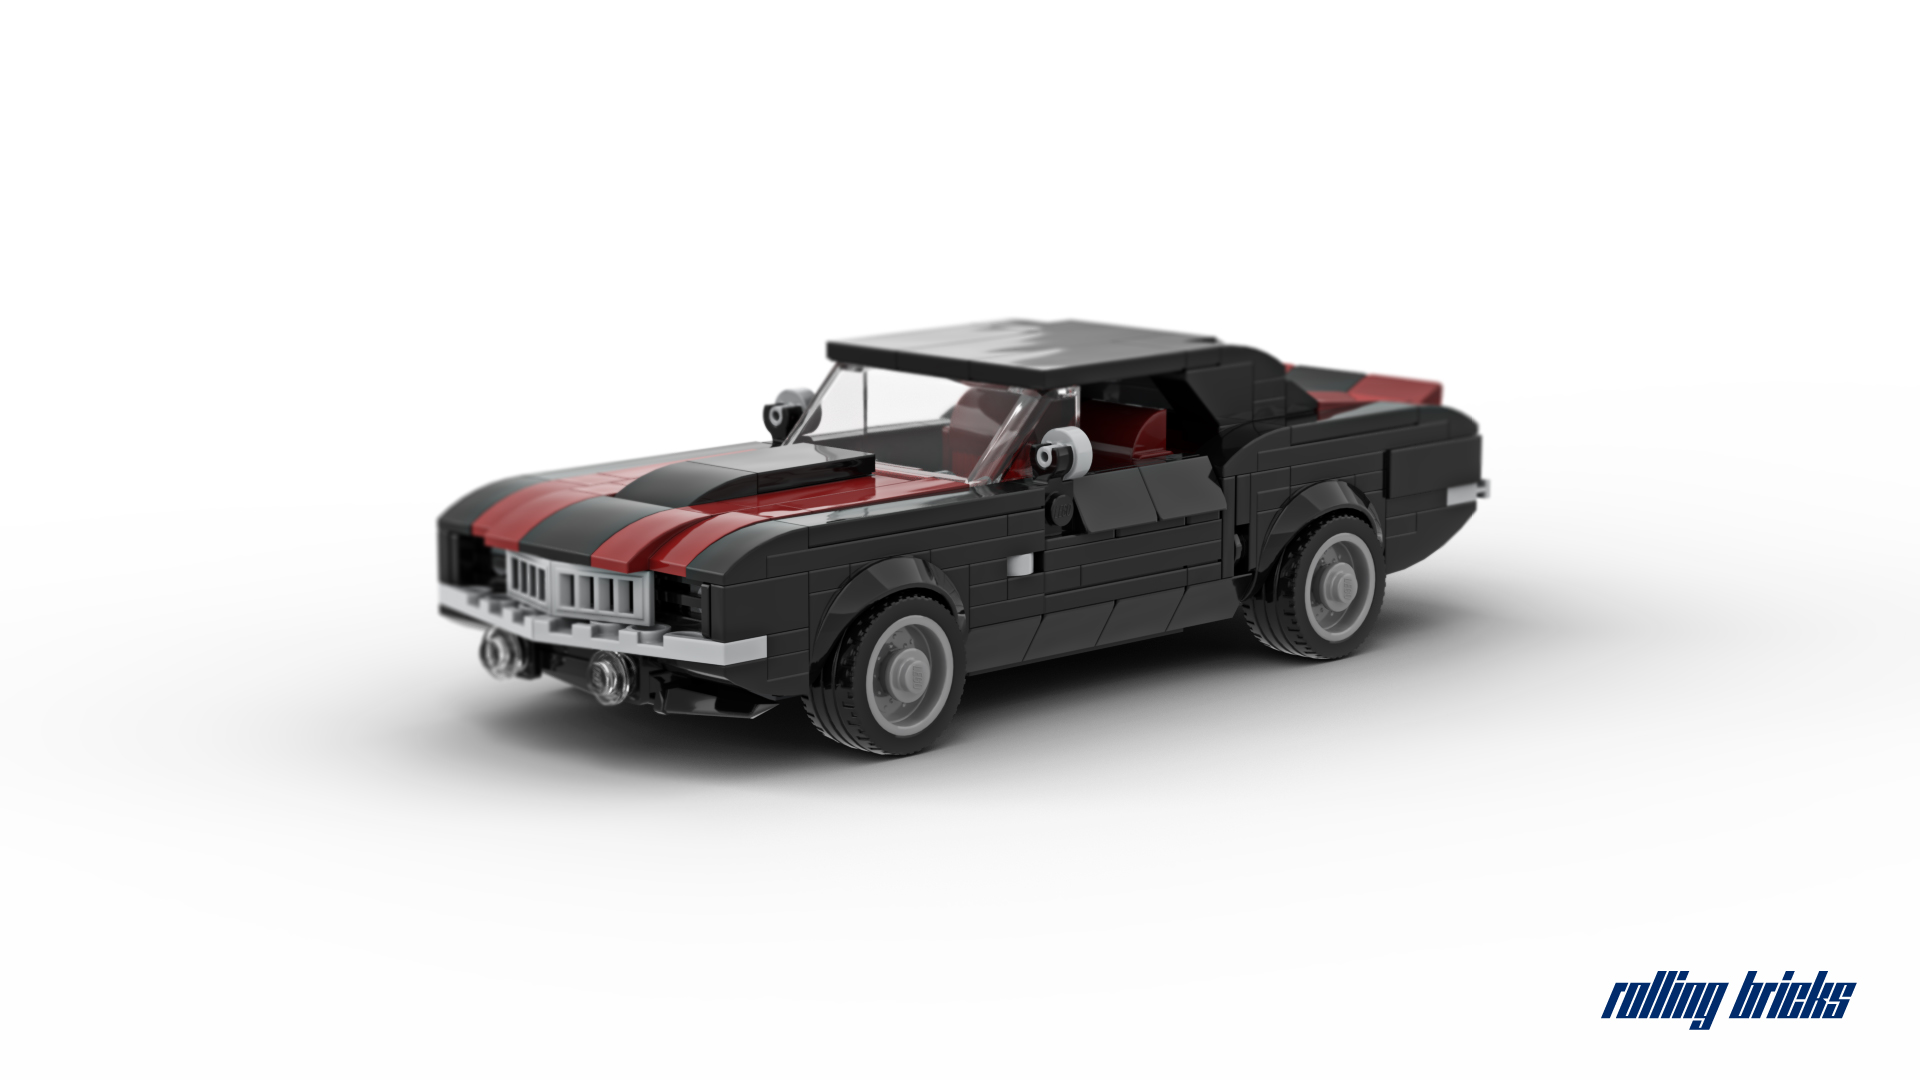 LEGO MOC Eleanor - Ford Mustang Shelby GT500 by RollingBricks